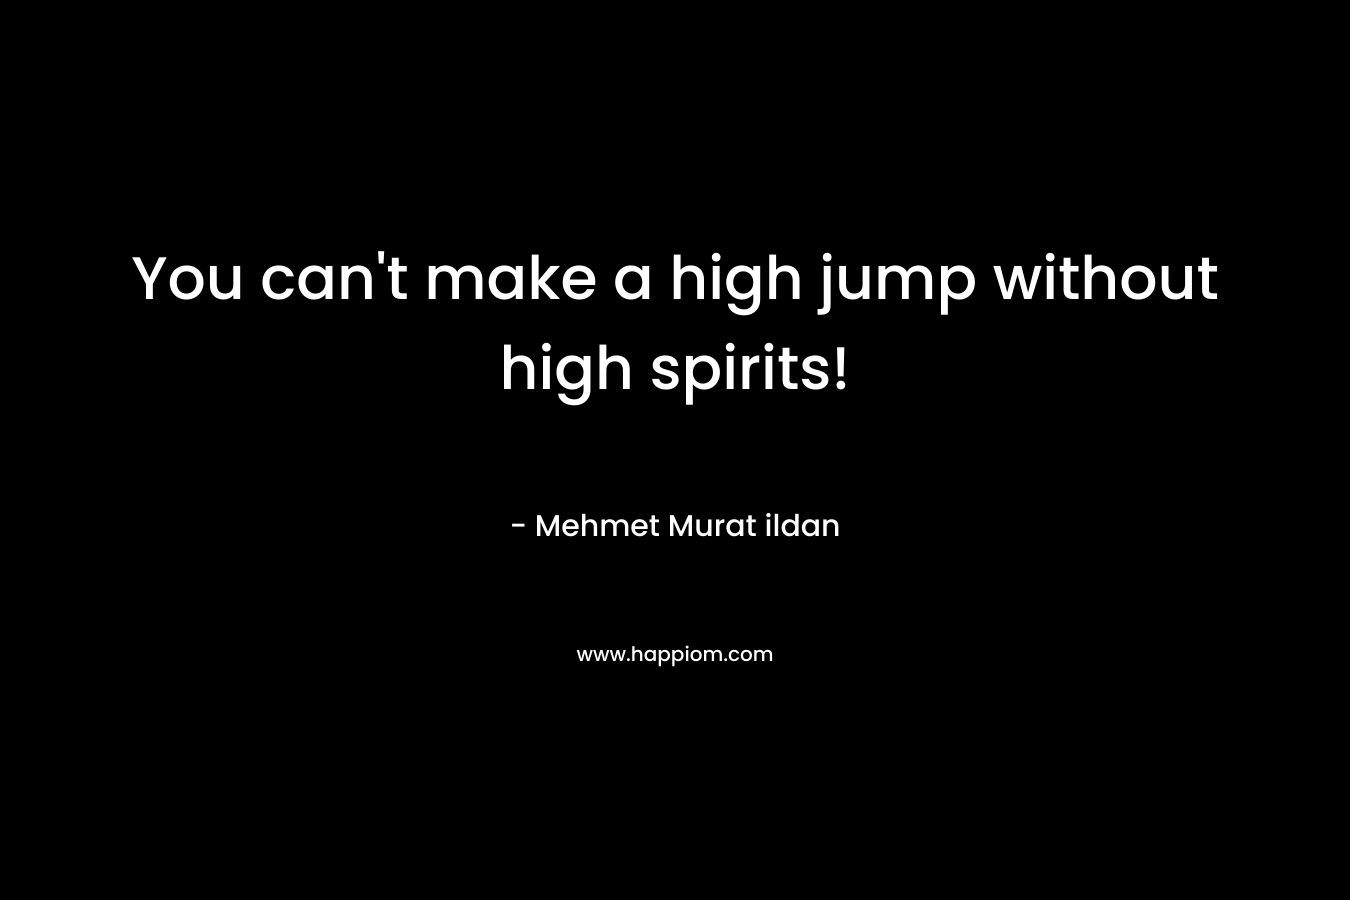 You can't make a high jump without high spirits!